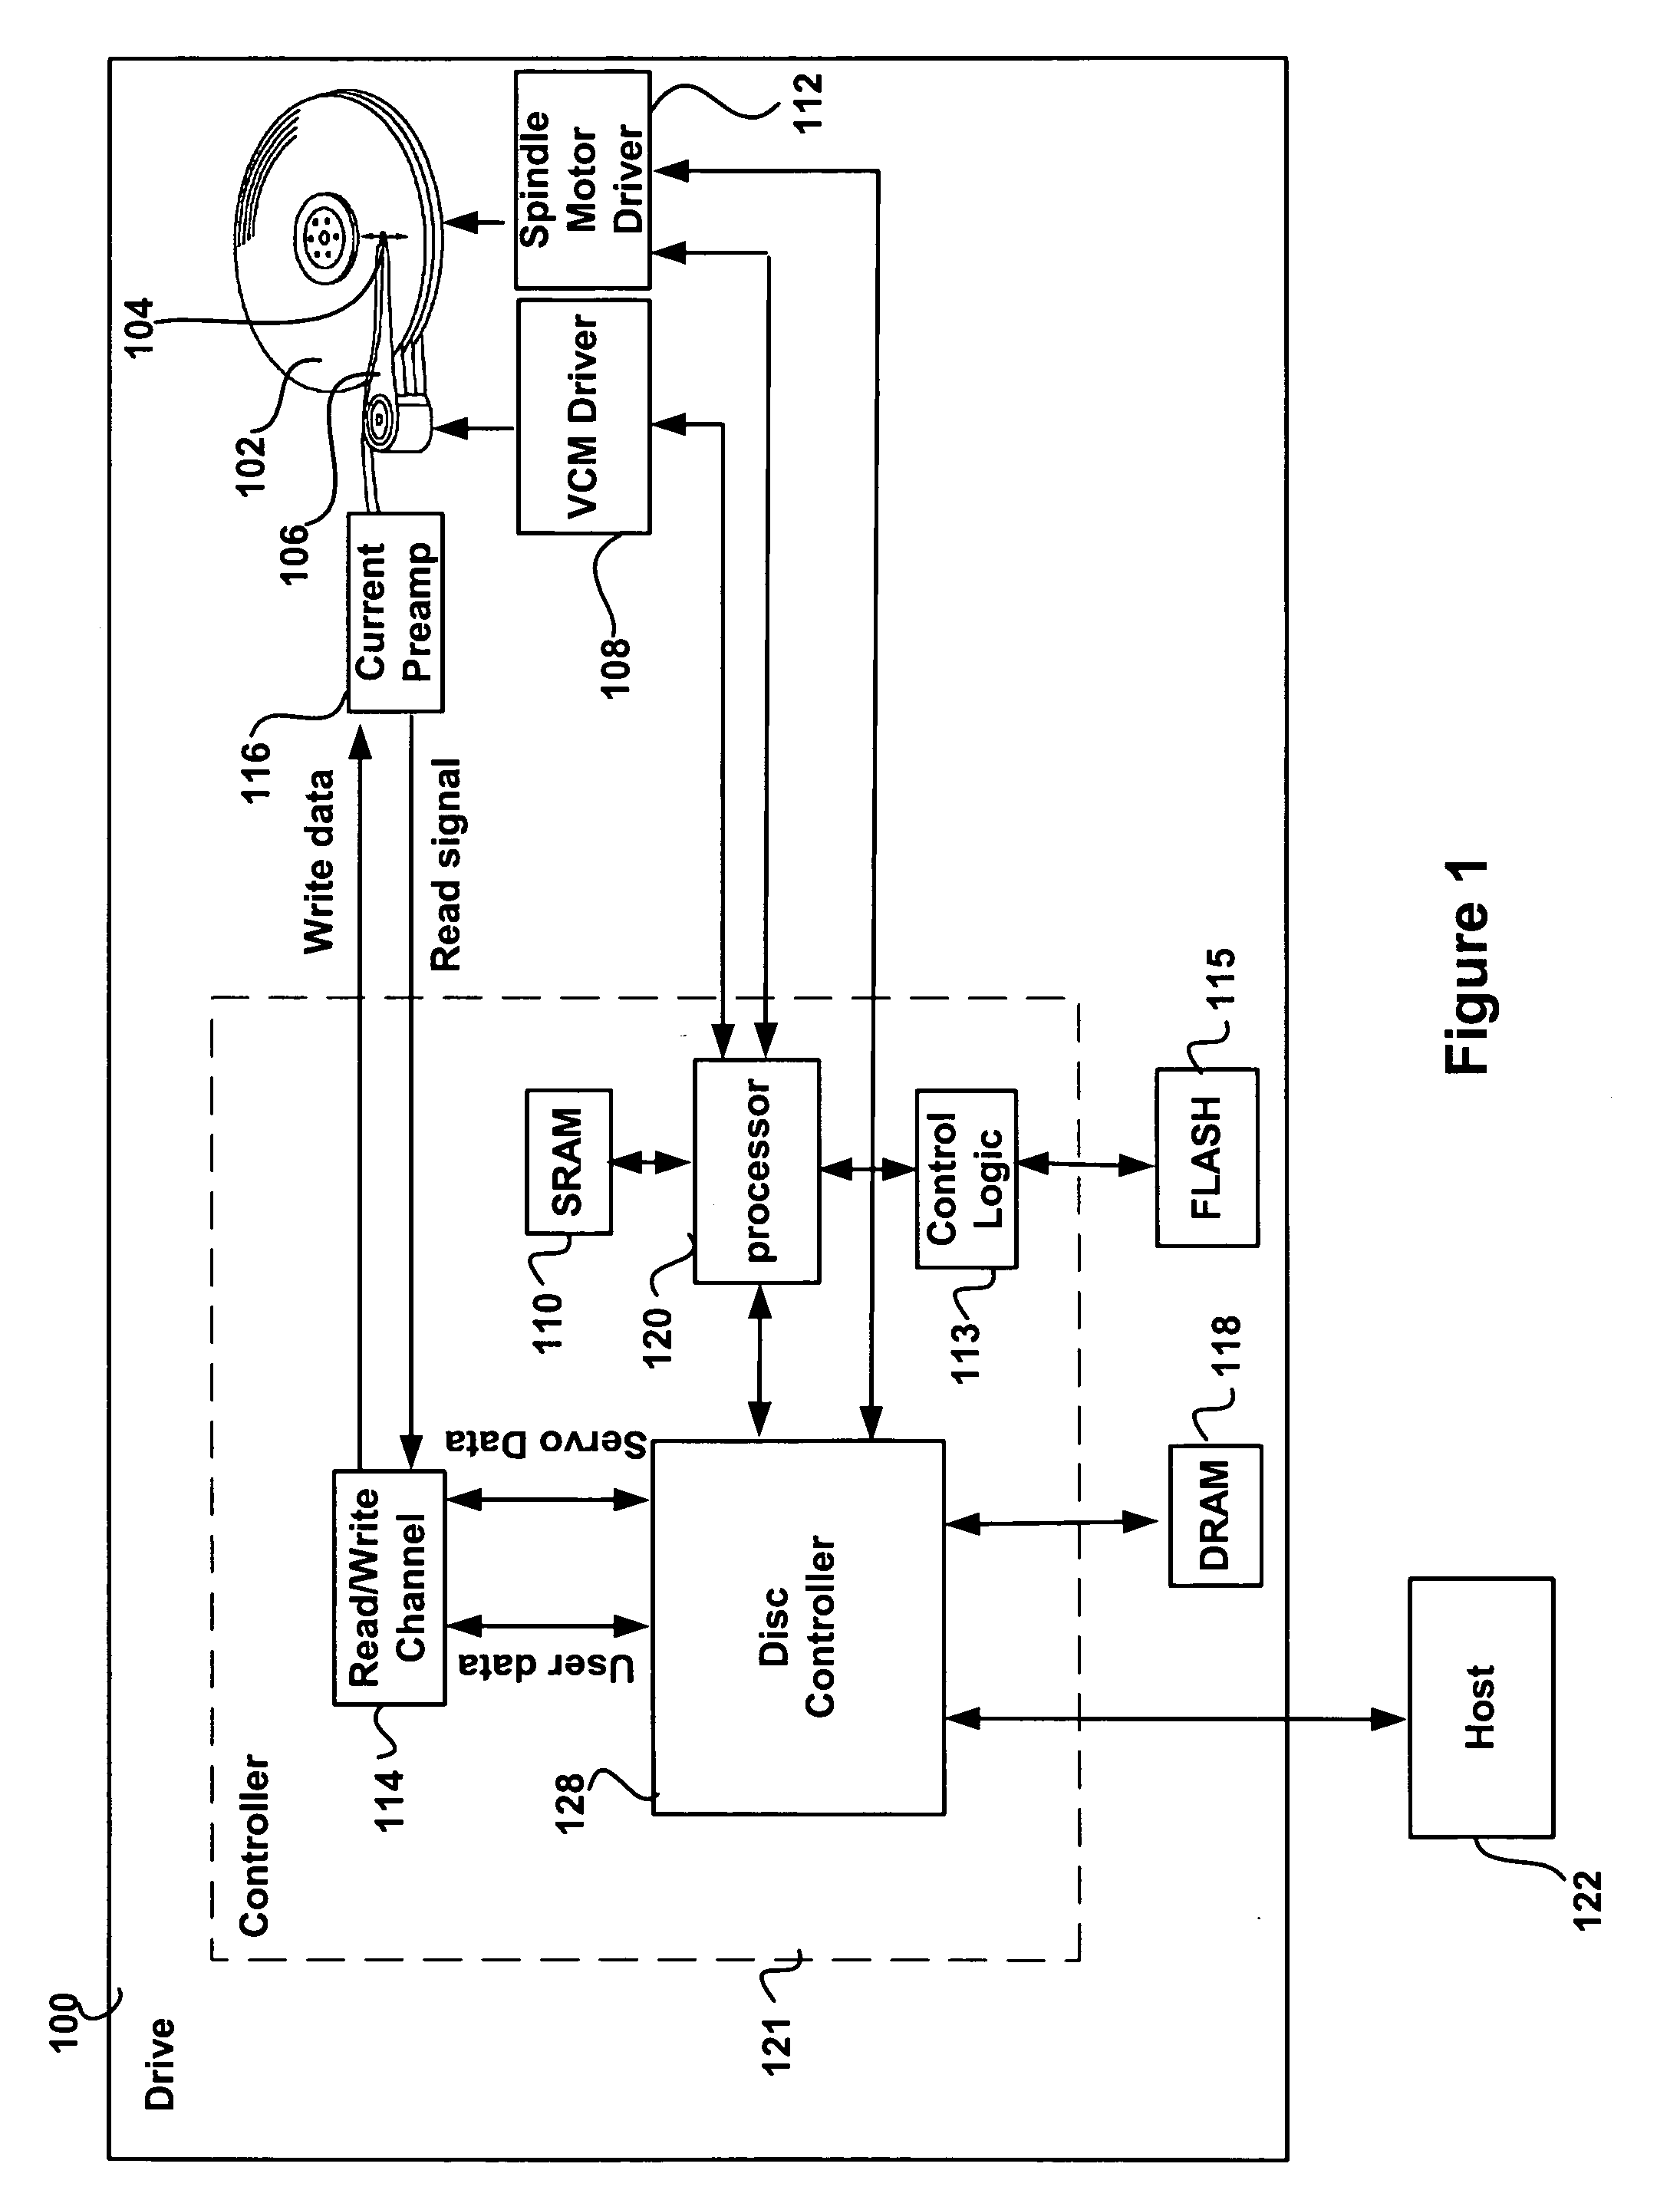 System and method for disk formatting